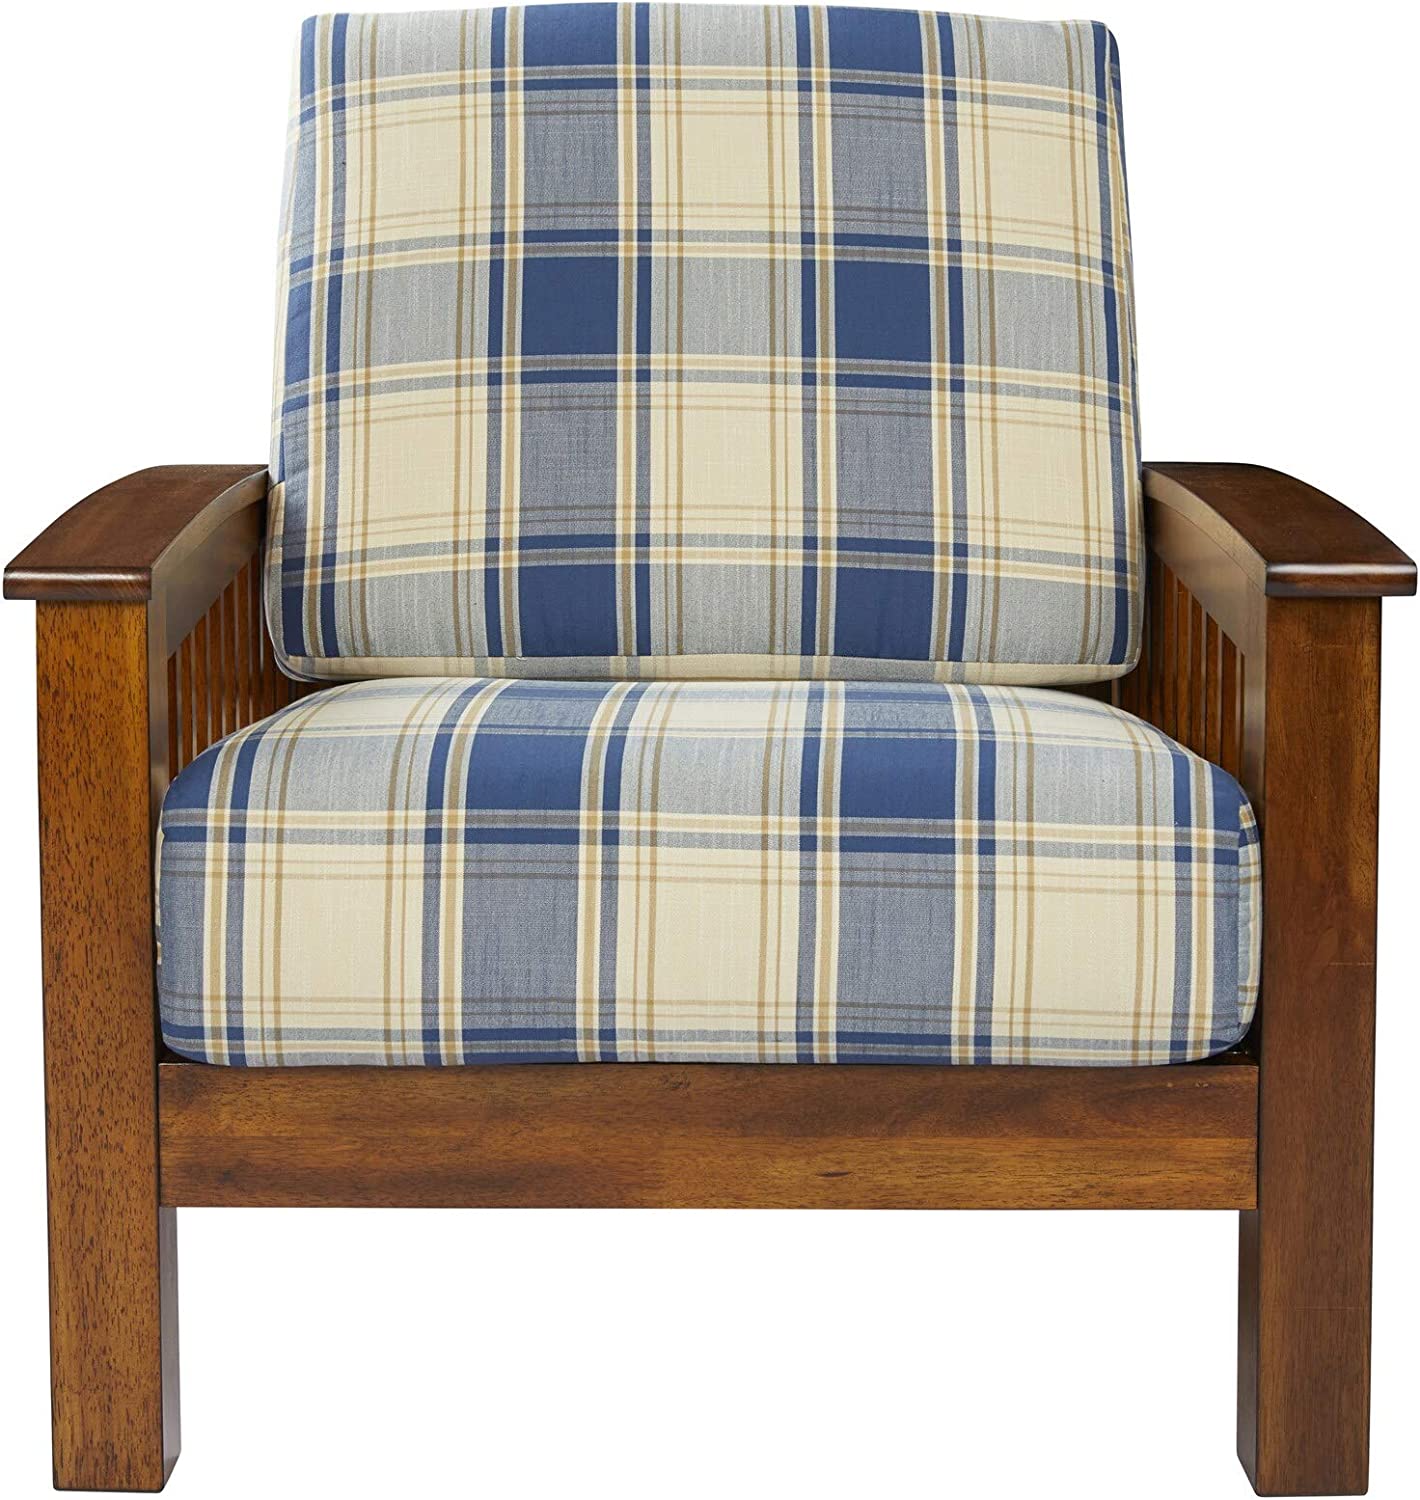 Homesvale Maisie Mission Style Arm Chair